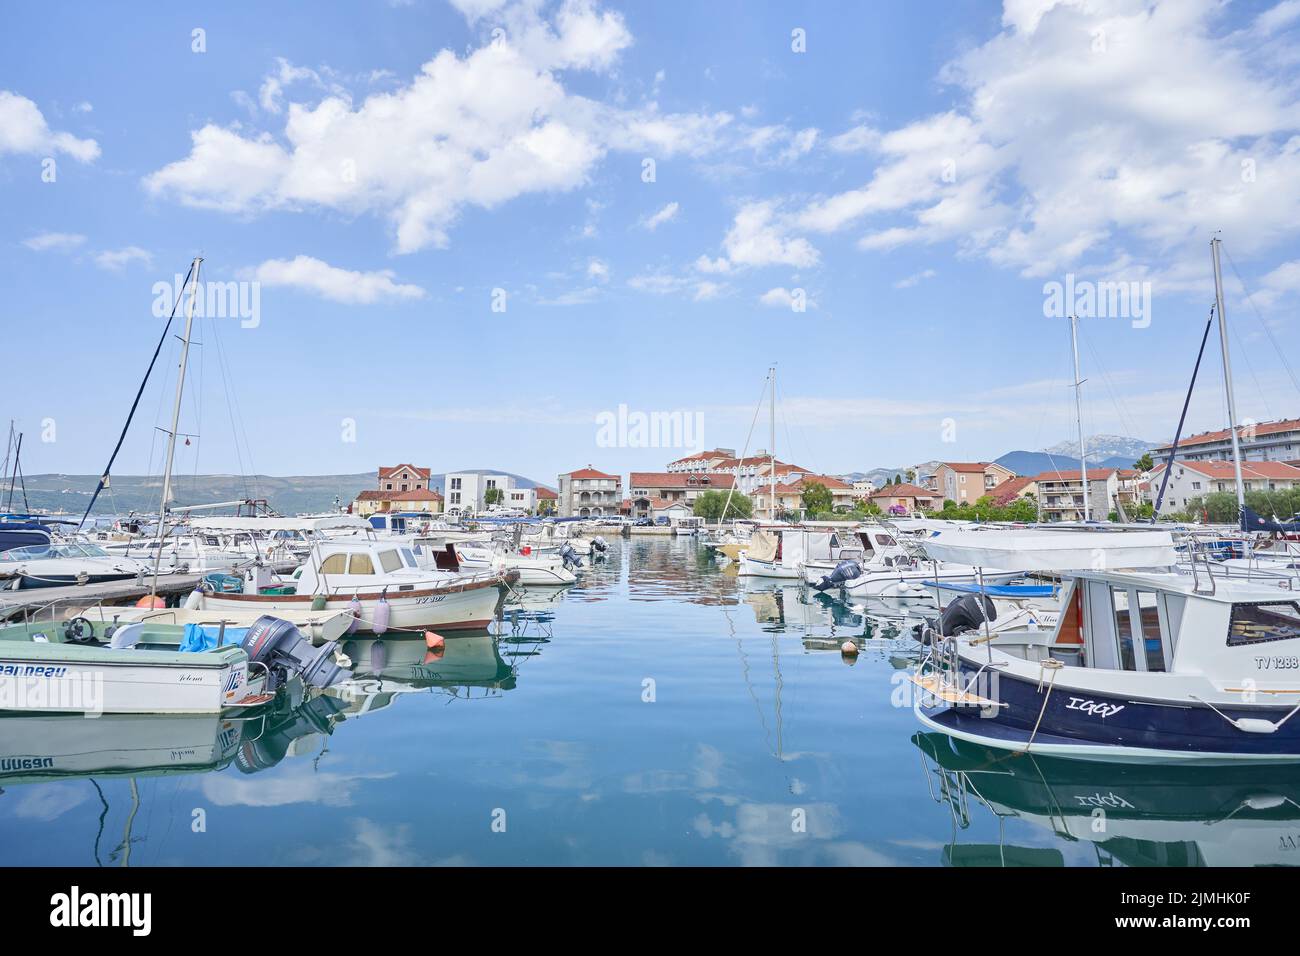 Small boats and pleasure boats in the dock Stock Photo